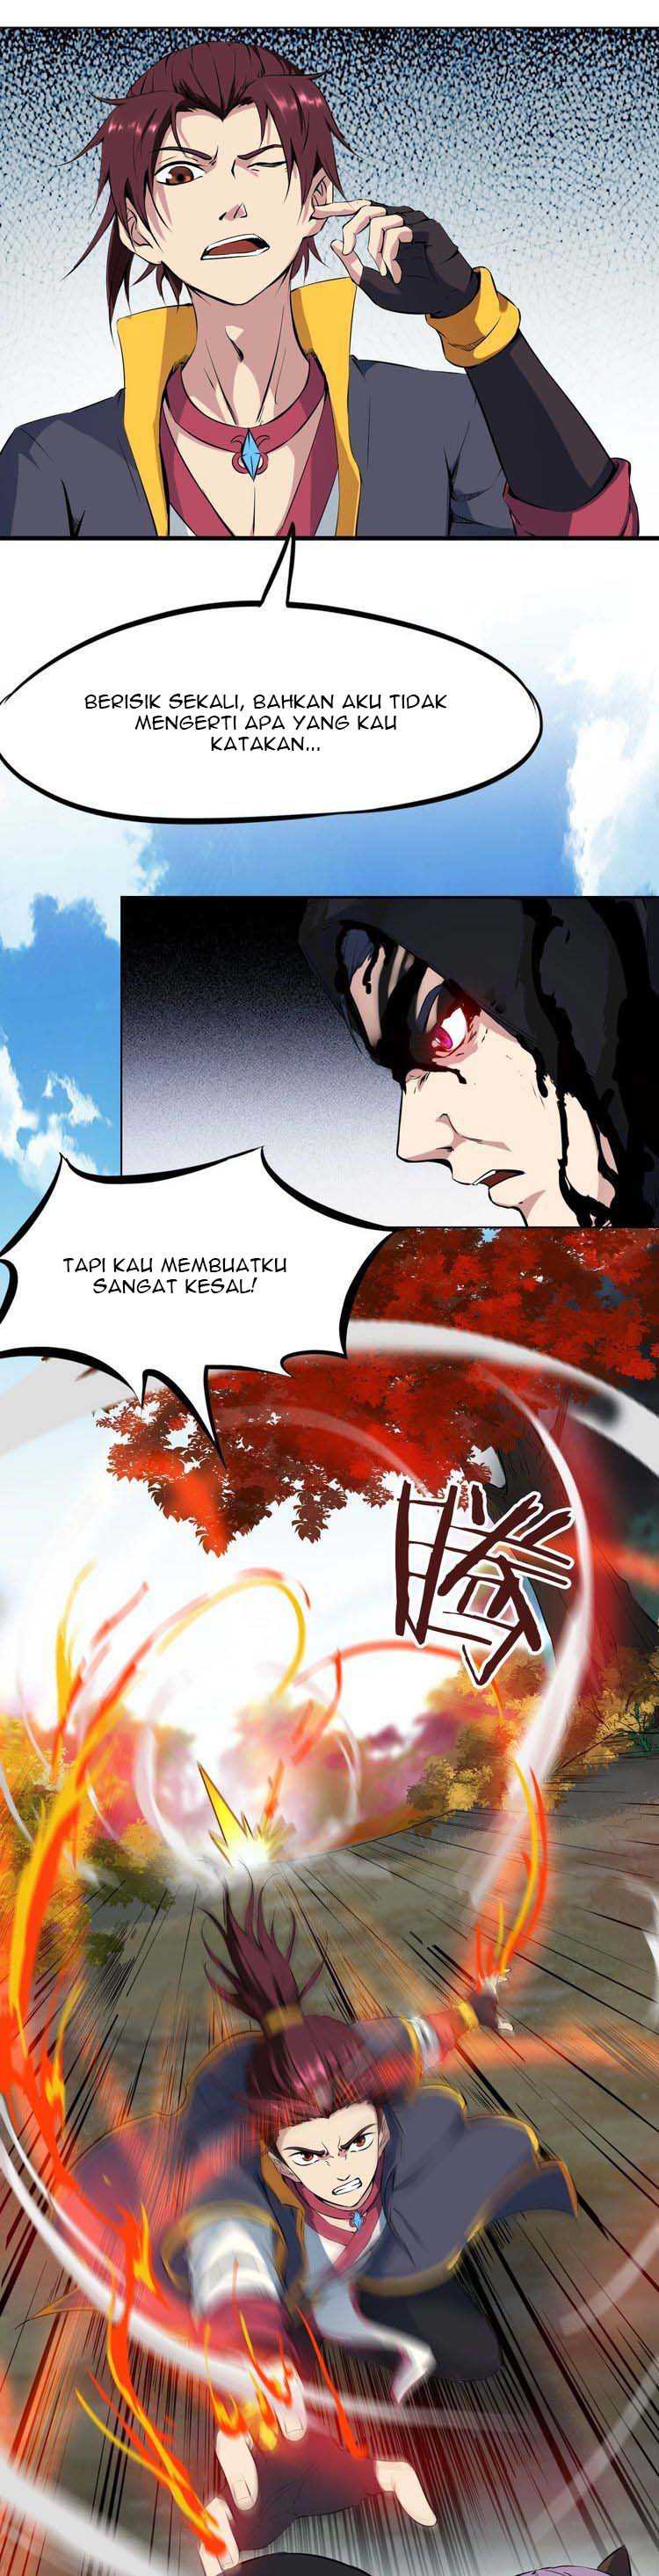 Dragon’s Blood Vessels Chapter 45